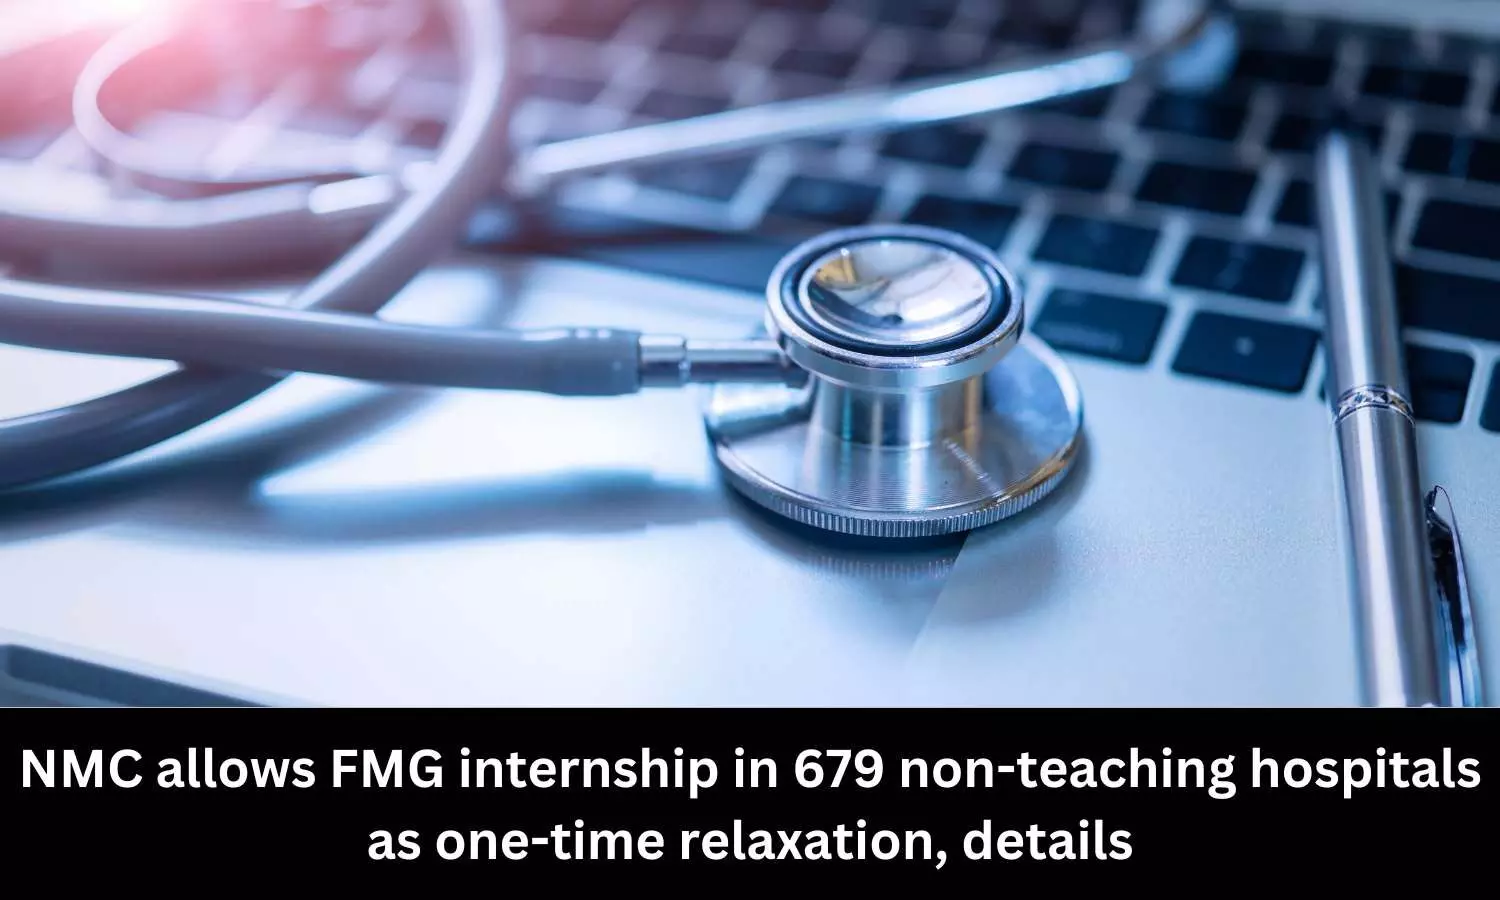 One-time relaxation to FMGs: NMC allows internship in 679 non-teaching hospitals